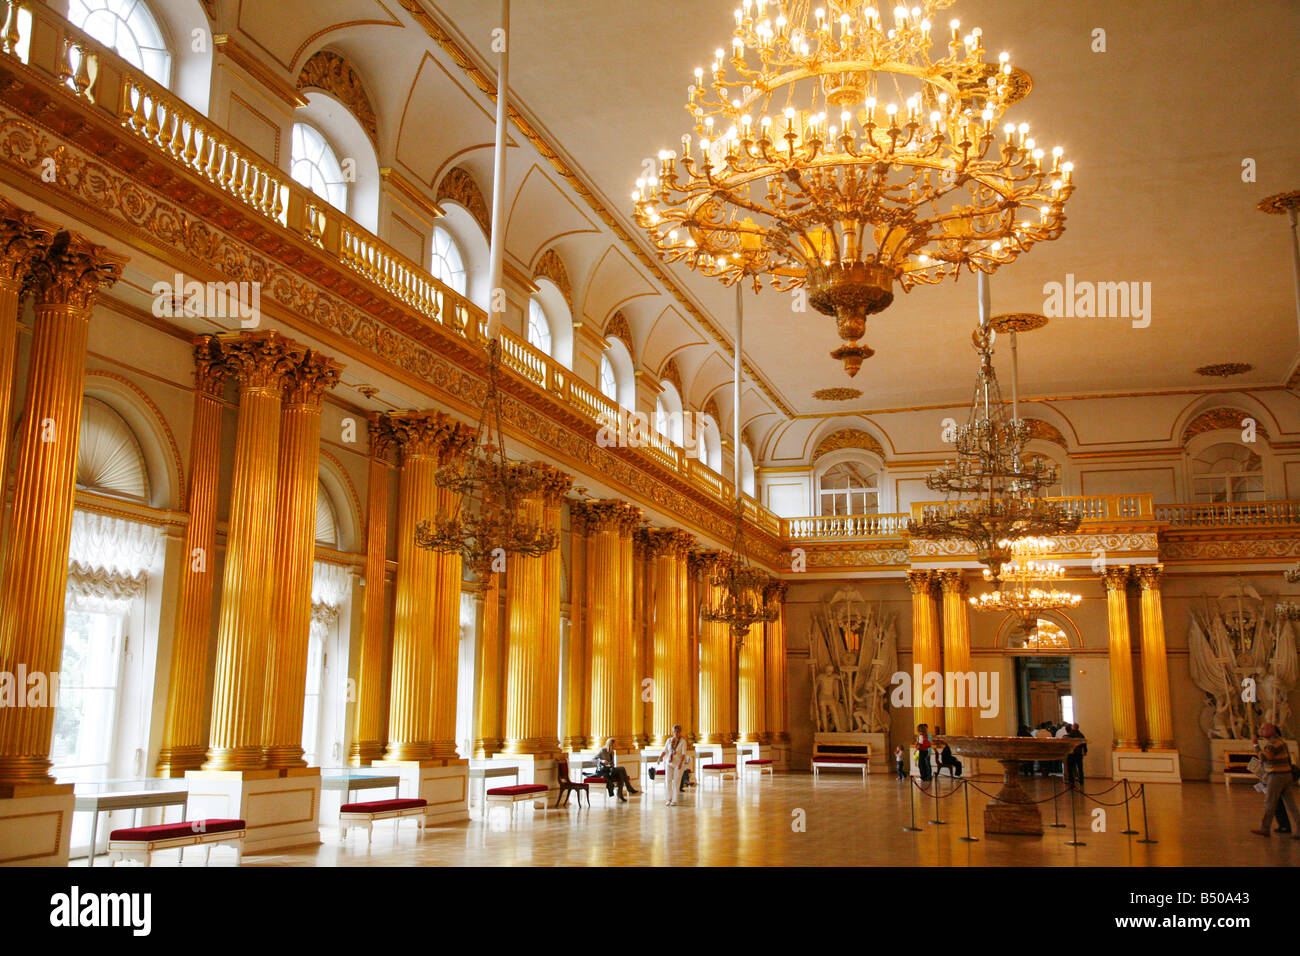 Aug 2008 - The Armorial Hall at the Hermitage Museum St Petersburg Russia Stock Photo